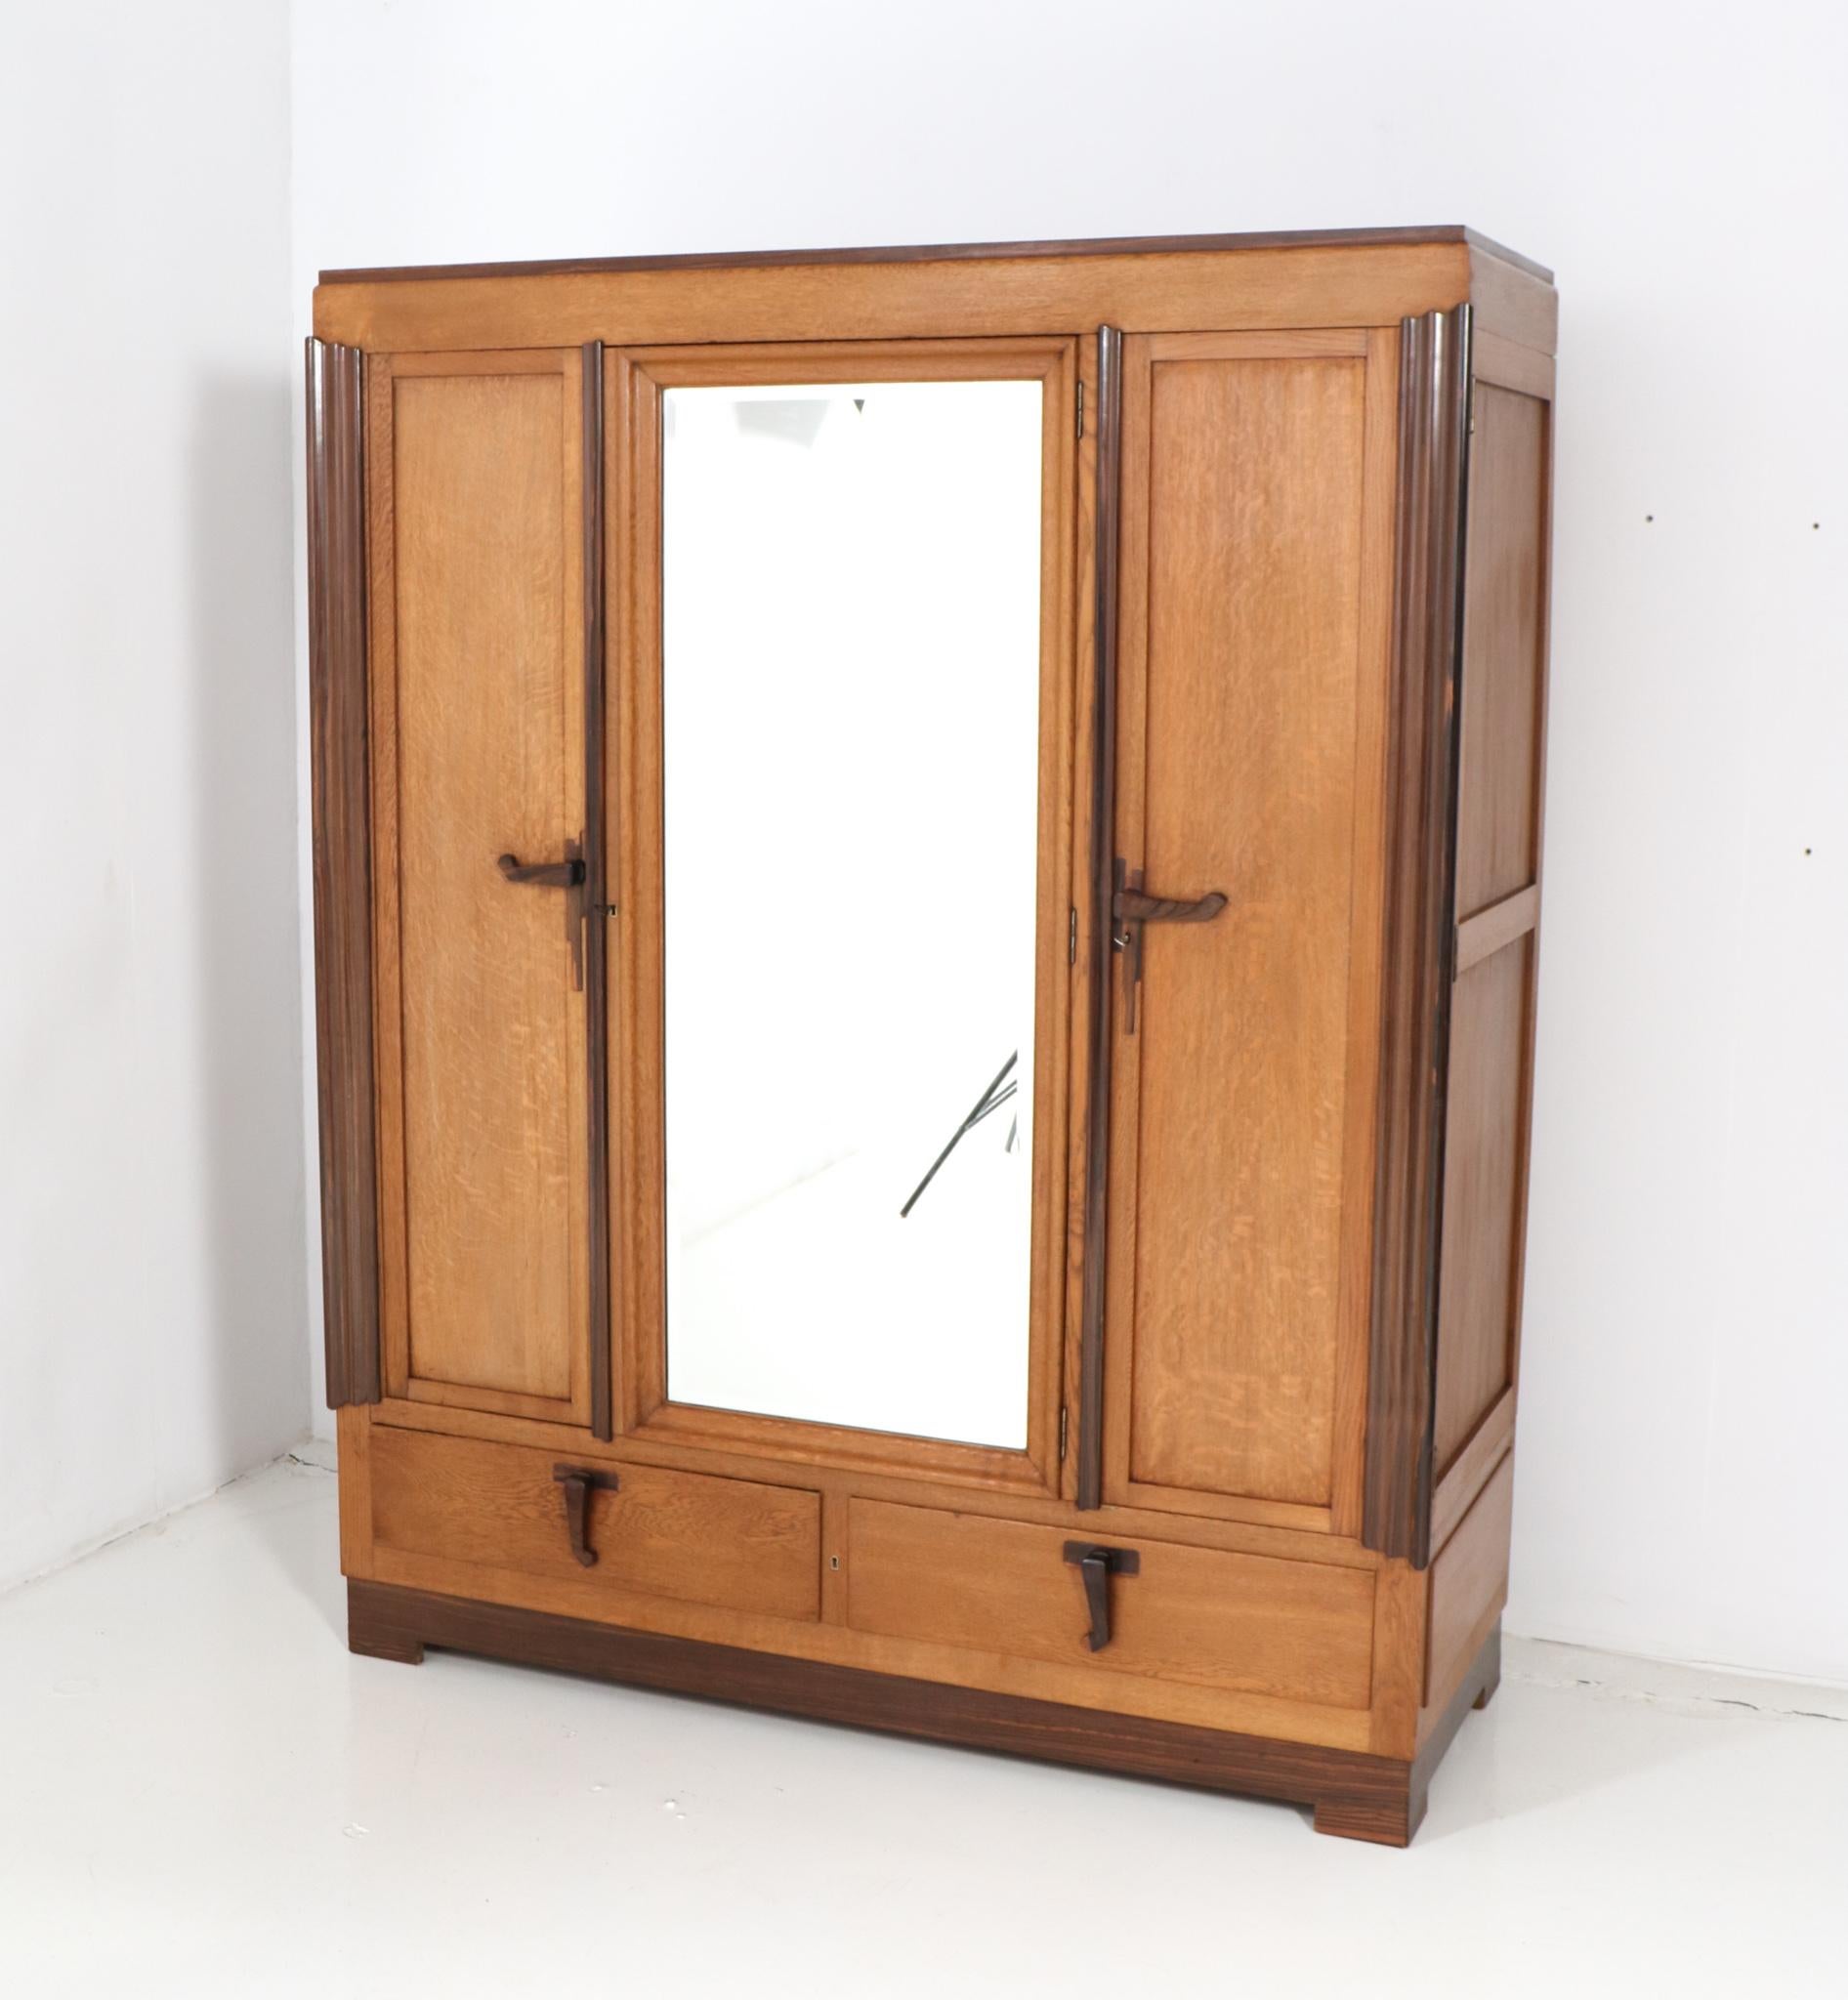 Magnificent and rare Art Deco Amsterdamse School armoire or wardrobe. Design by C.H. Eckhart Rotterdam. Striking Dutch design from the 1920s. Solid oak with original solid macassar ebony handles on doors and drawers. Original beveled glass mirror.